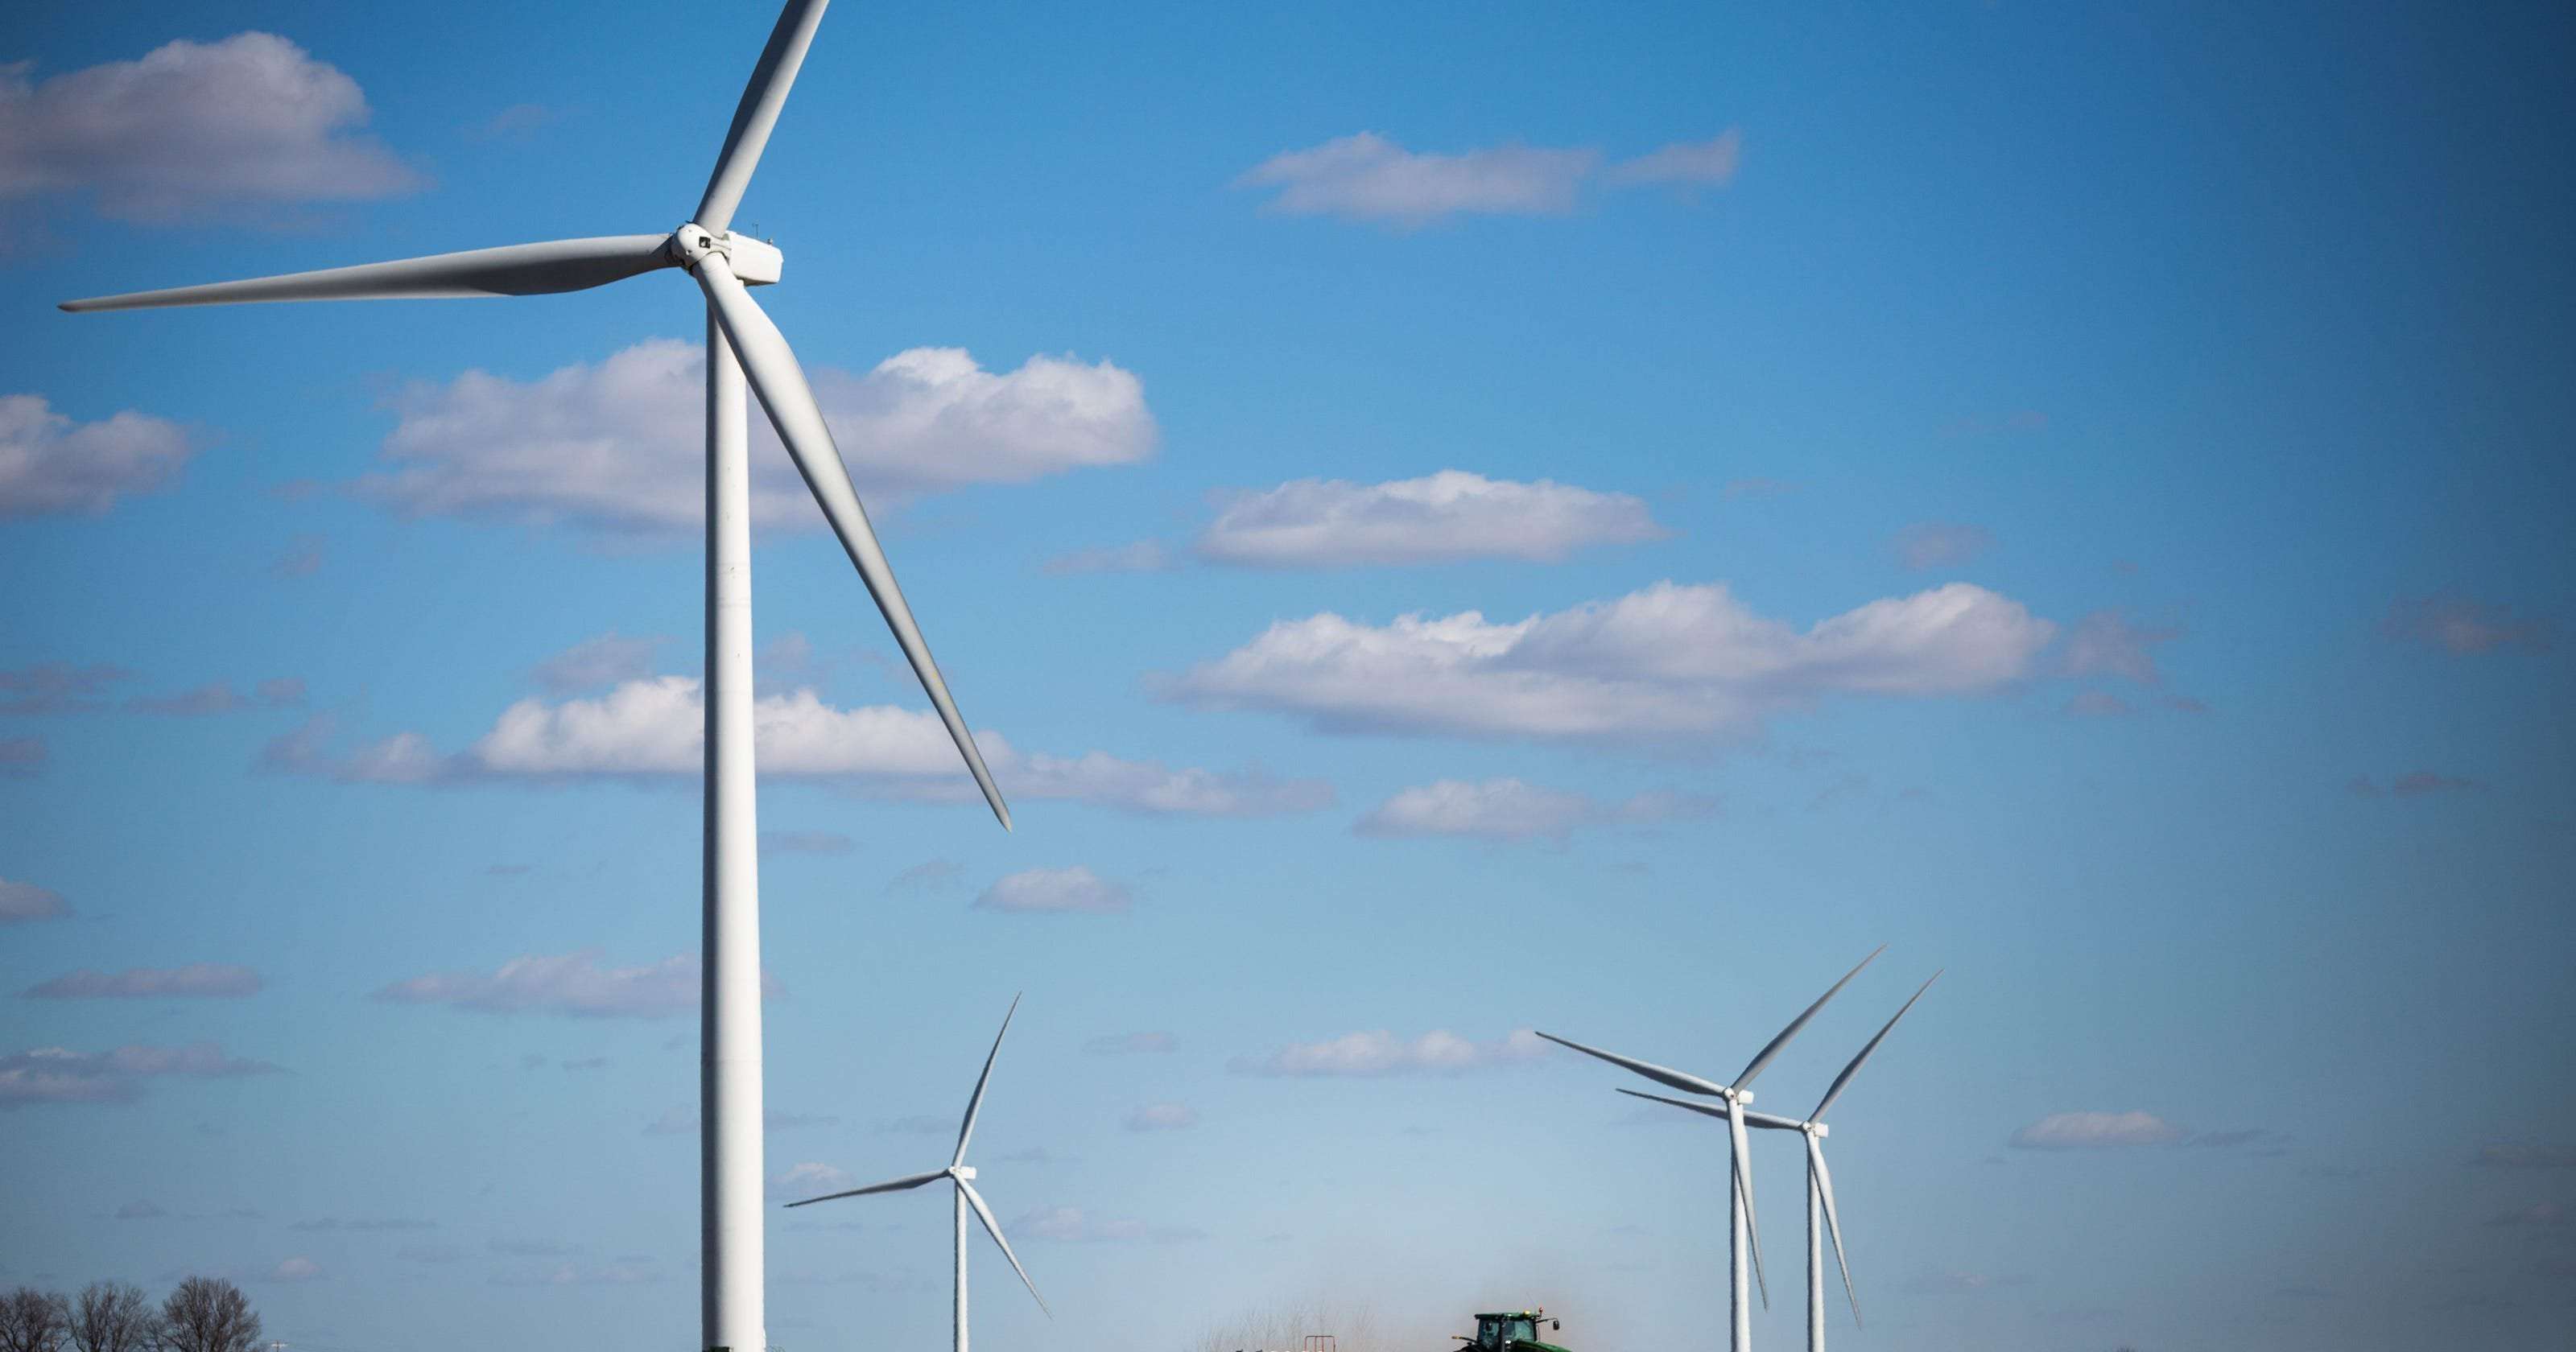 image for Wind energy is now Iowa's largest source of electricity, report says